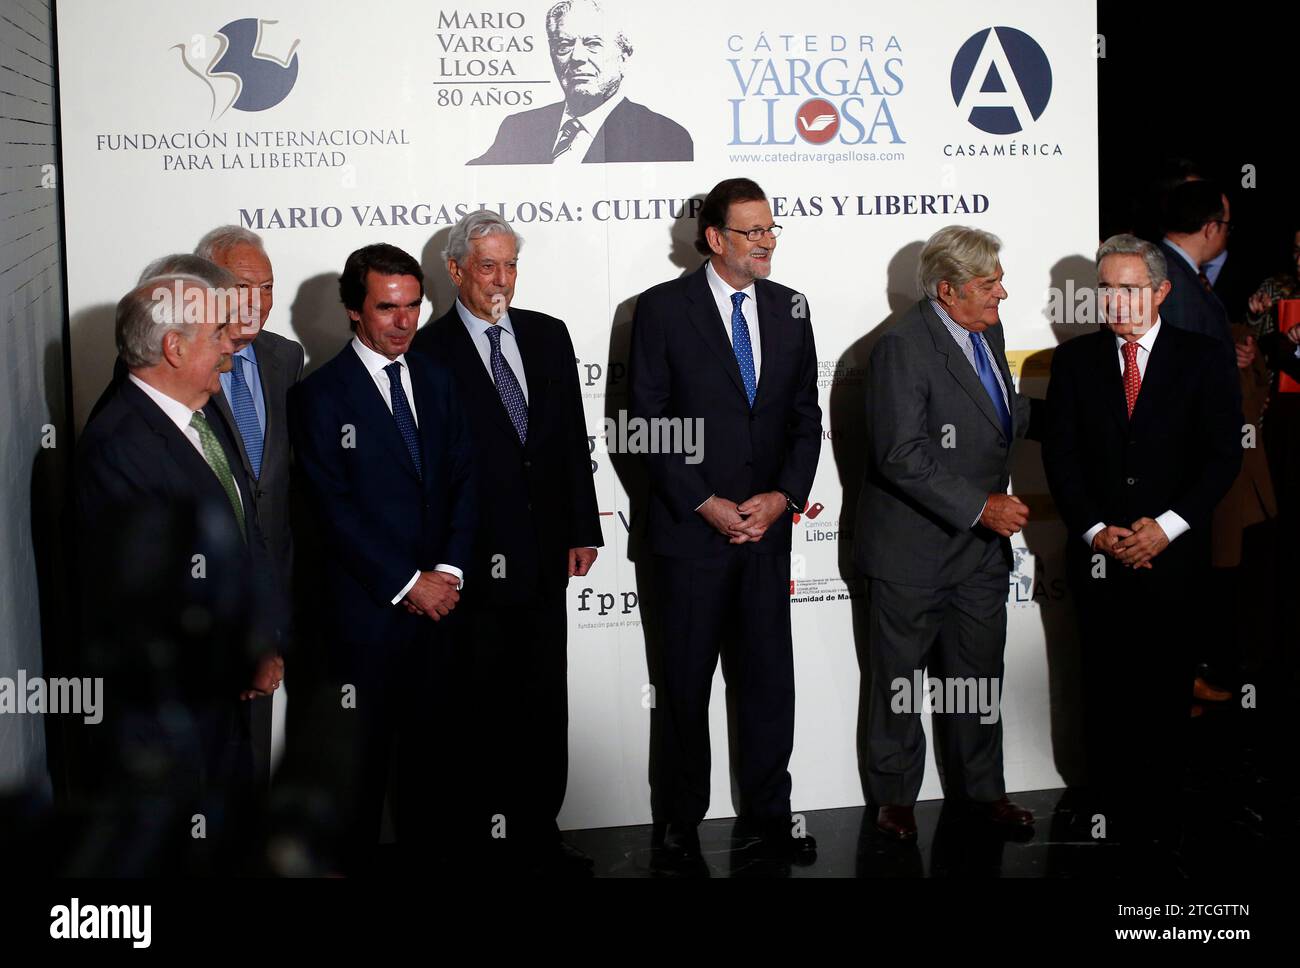 Madrid, 03/29/2016. Tribute event to Mario Vargas Llosa with the assistance of the acting President of the Government Mariano Rajoy, the former presidents José María Aznar and Felipe González, among others. Photo: Oscar del Pozo ARCHDC. Credit: Album / Archivo ABC / Oscar del Pozo Stock Photo